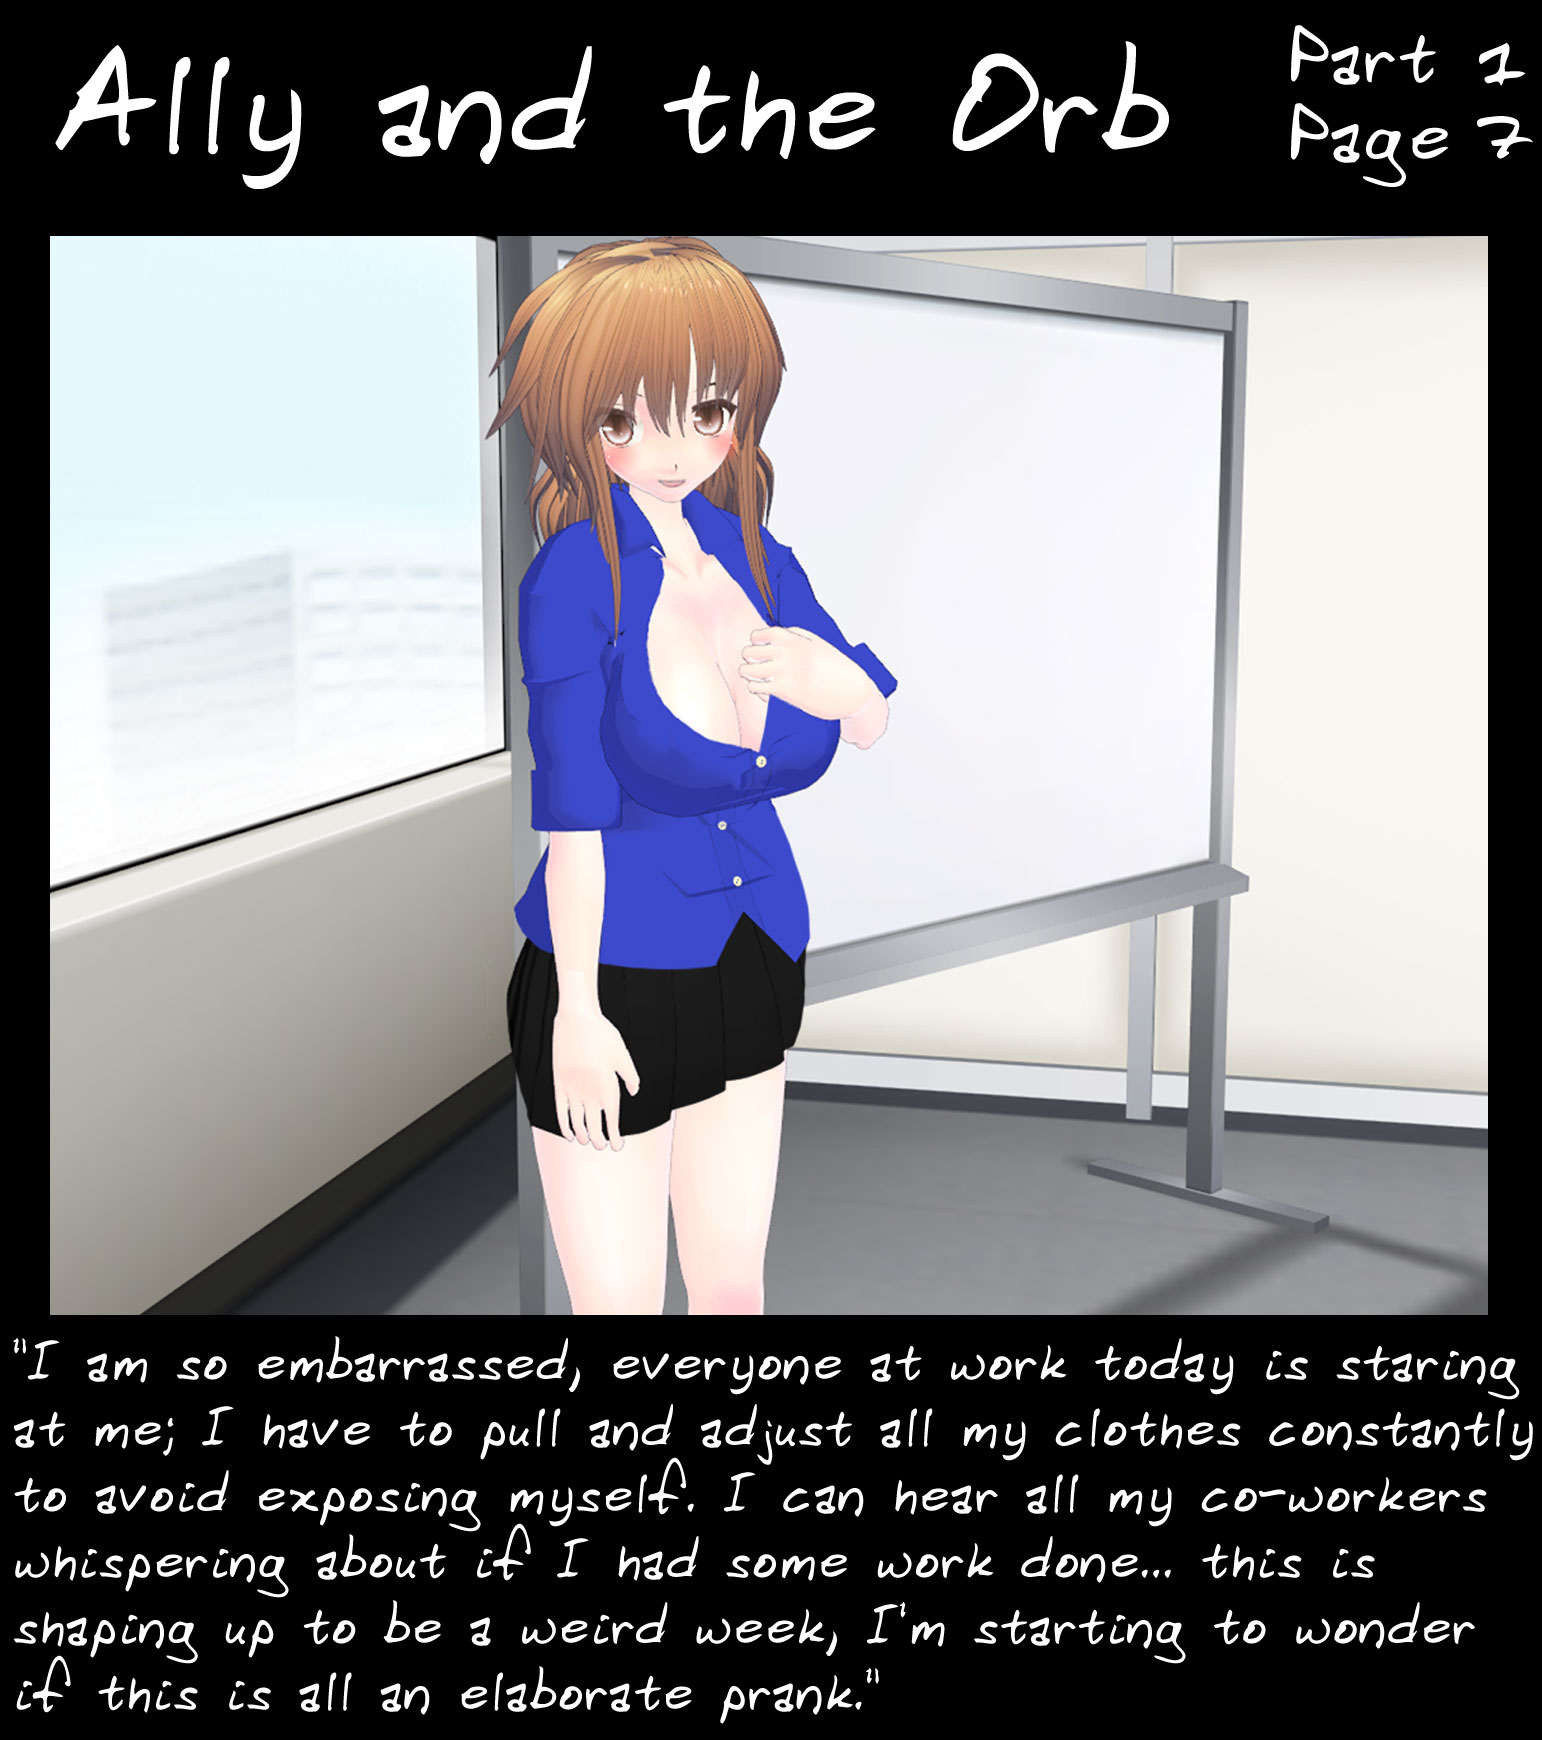 Ally and the Orb - Page 7 (Commission)